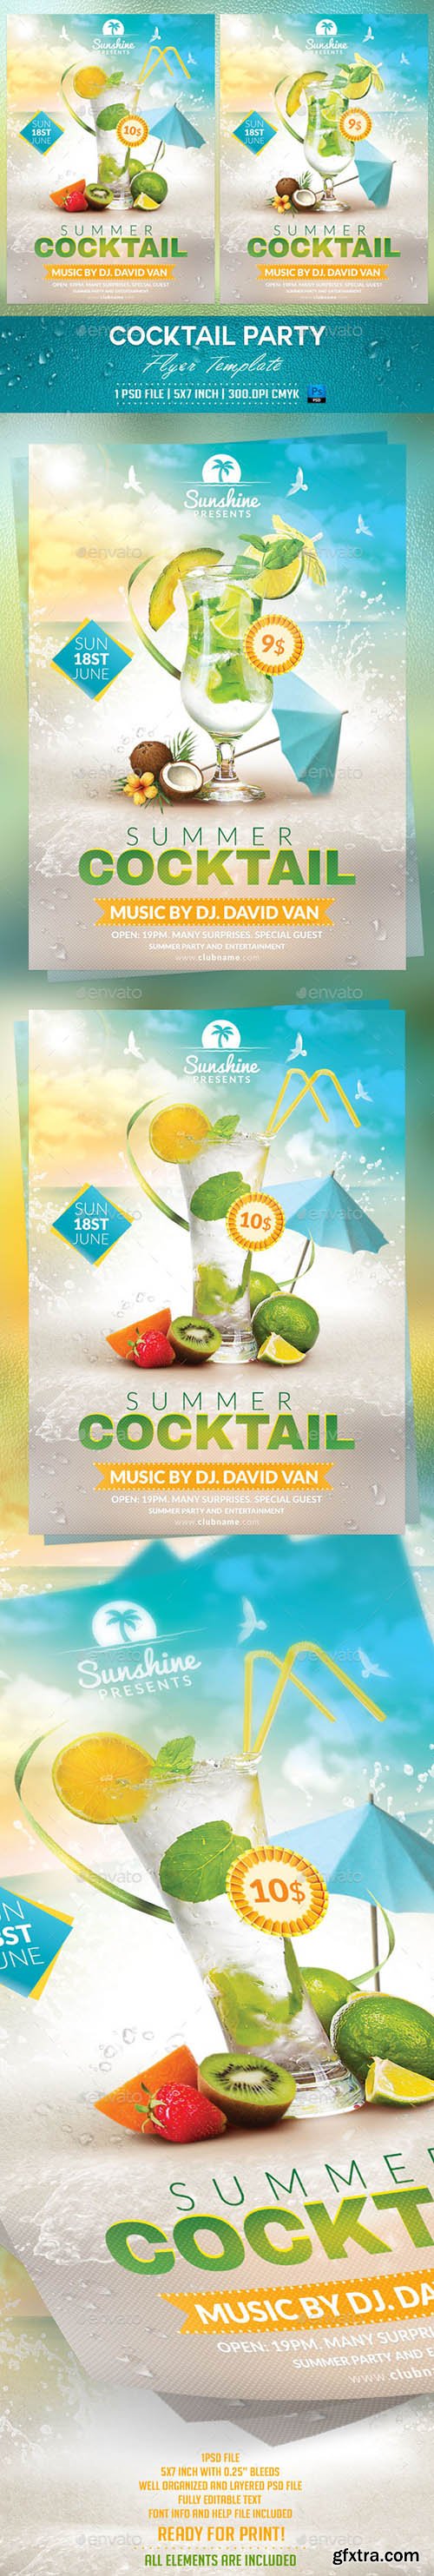 Graphicriver Cocktail Party Flyer Template 10540507